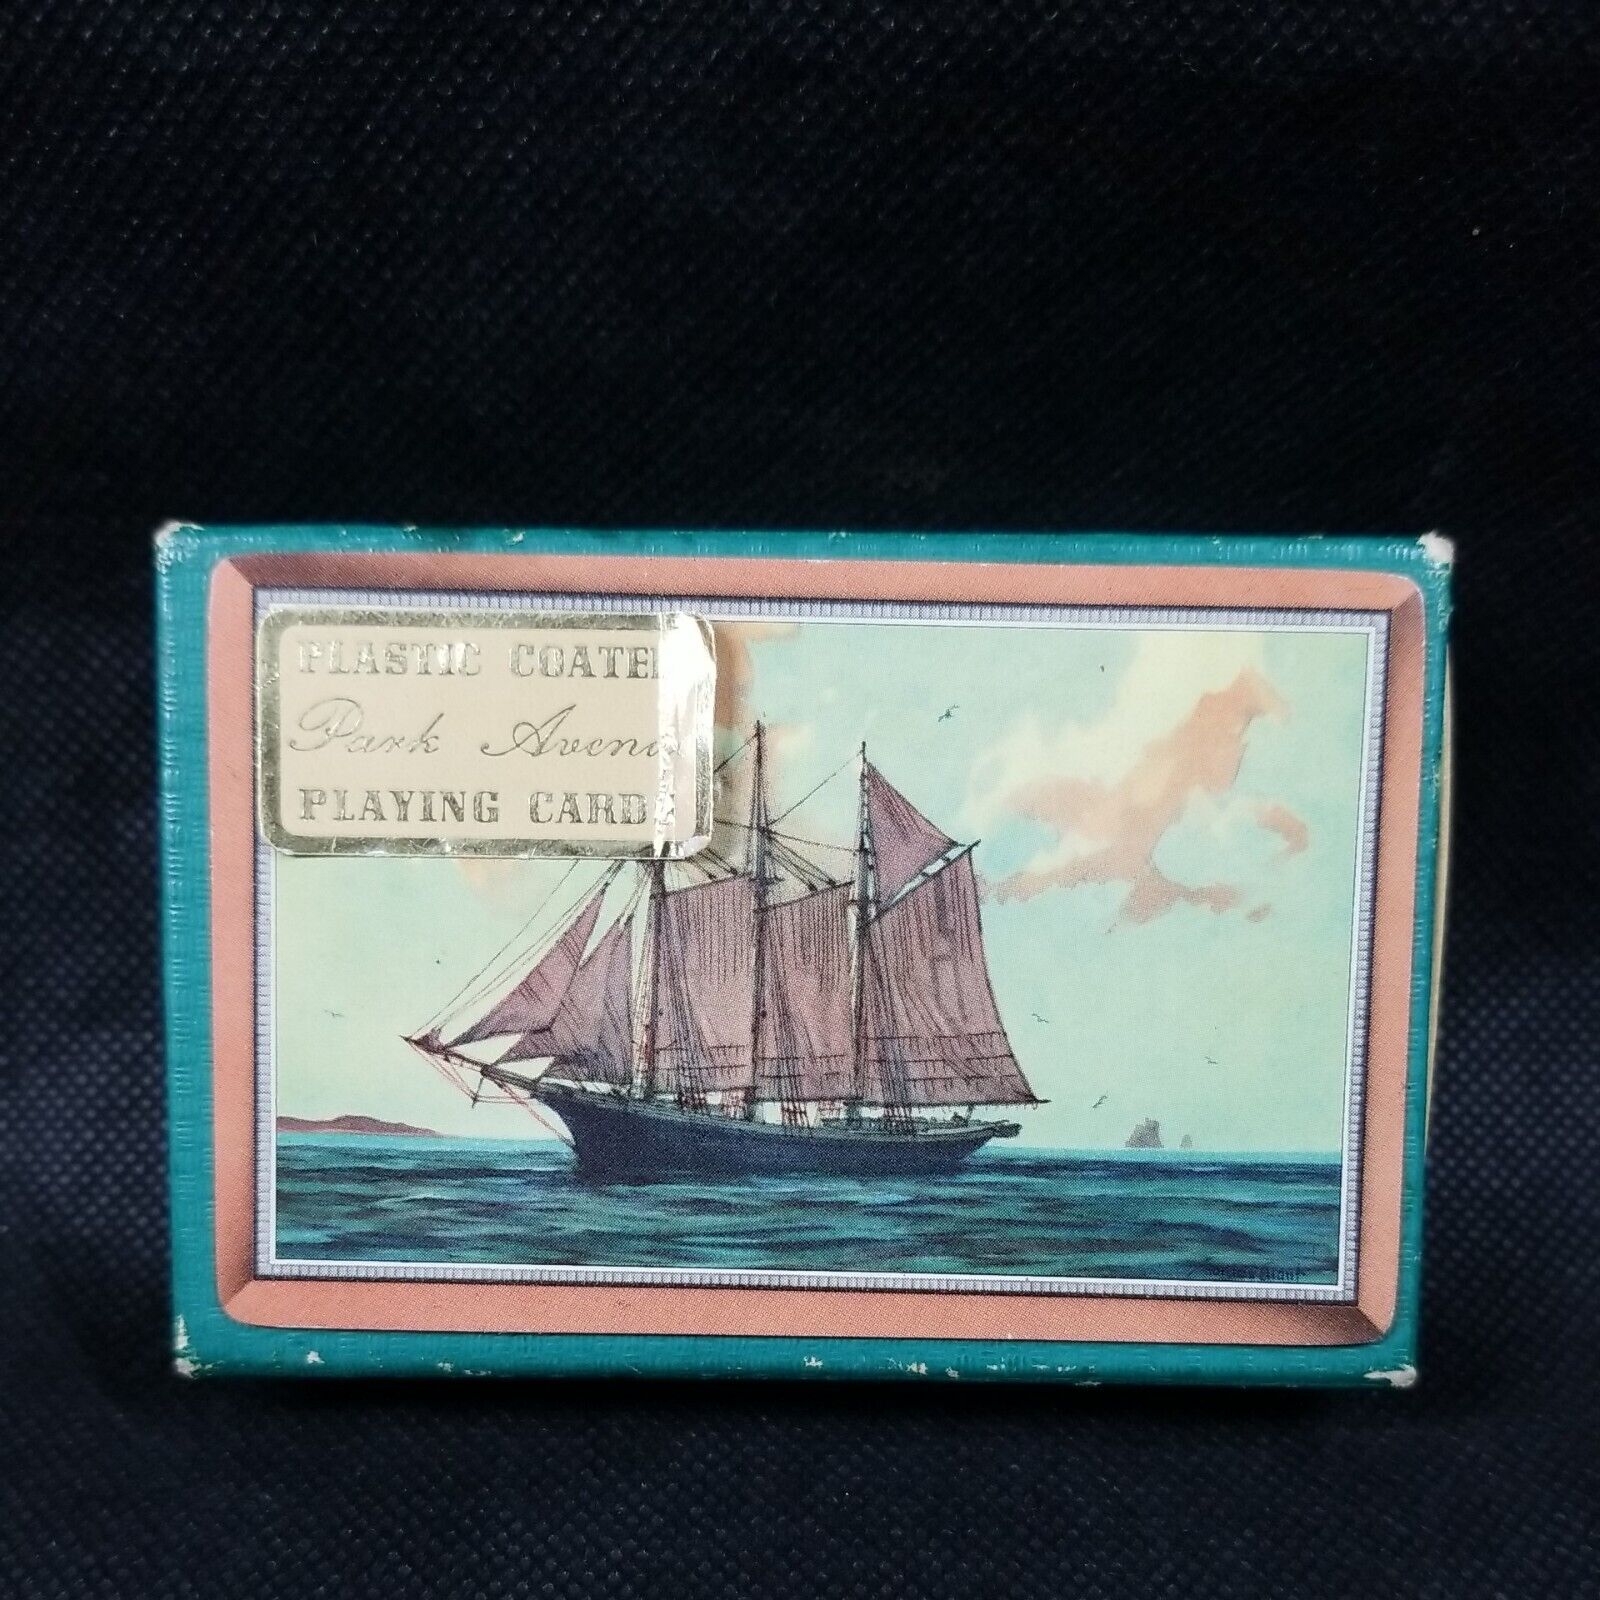 Vintage PARK AVENUE Playing Cards Ship Nautical Pirate Sail PLASTIC COATED New